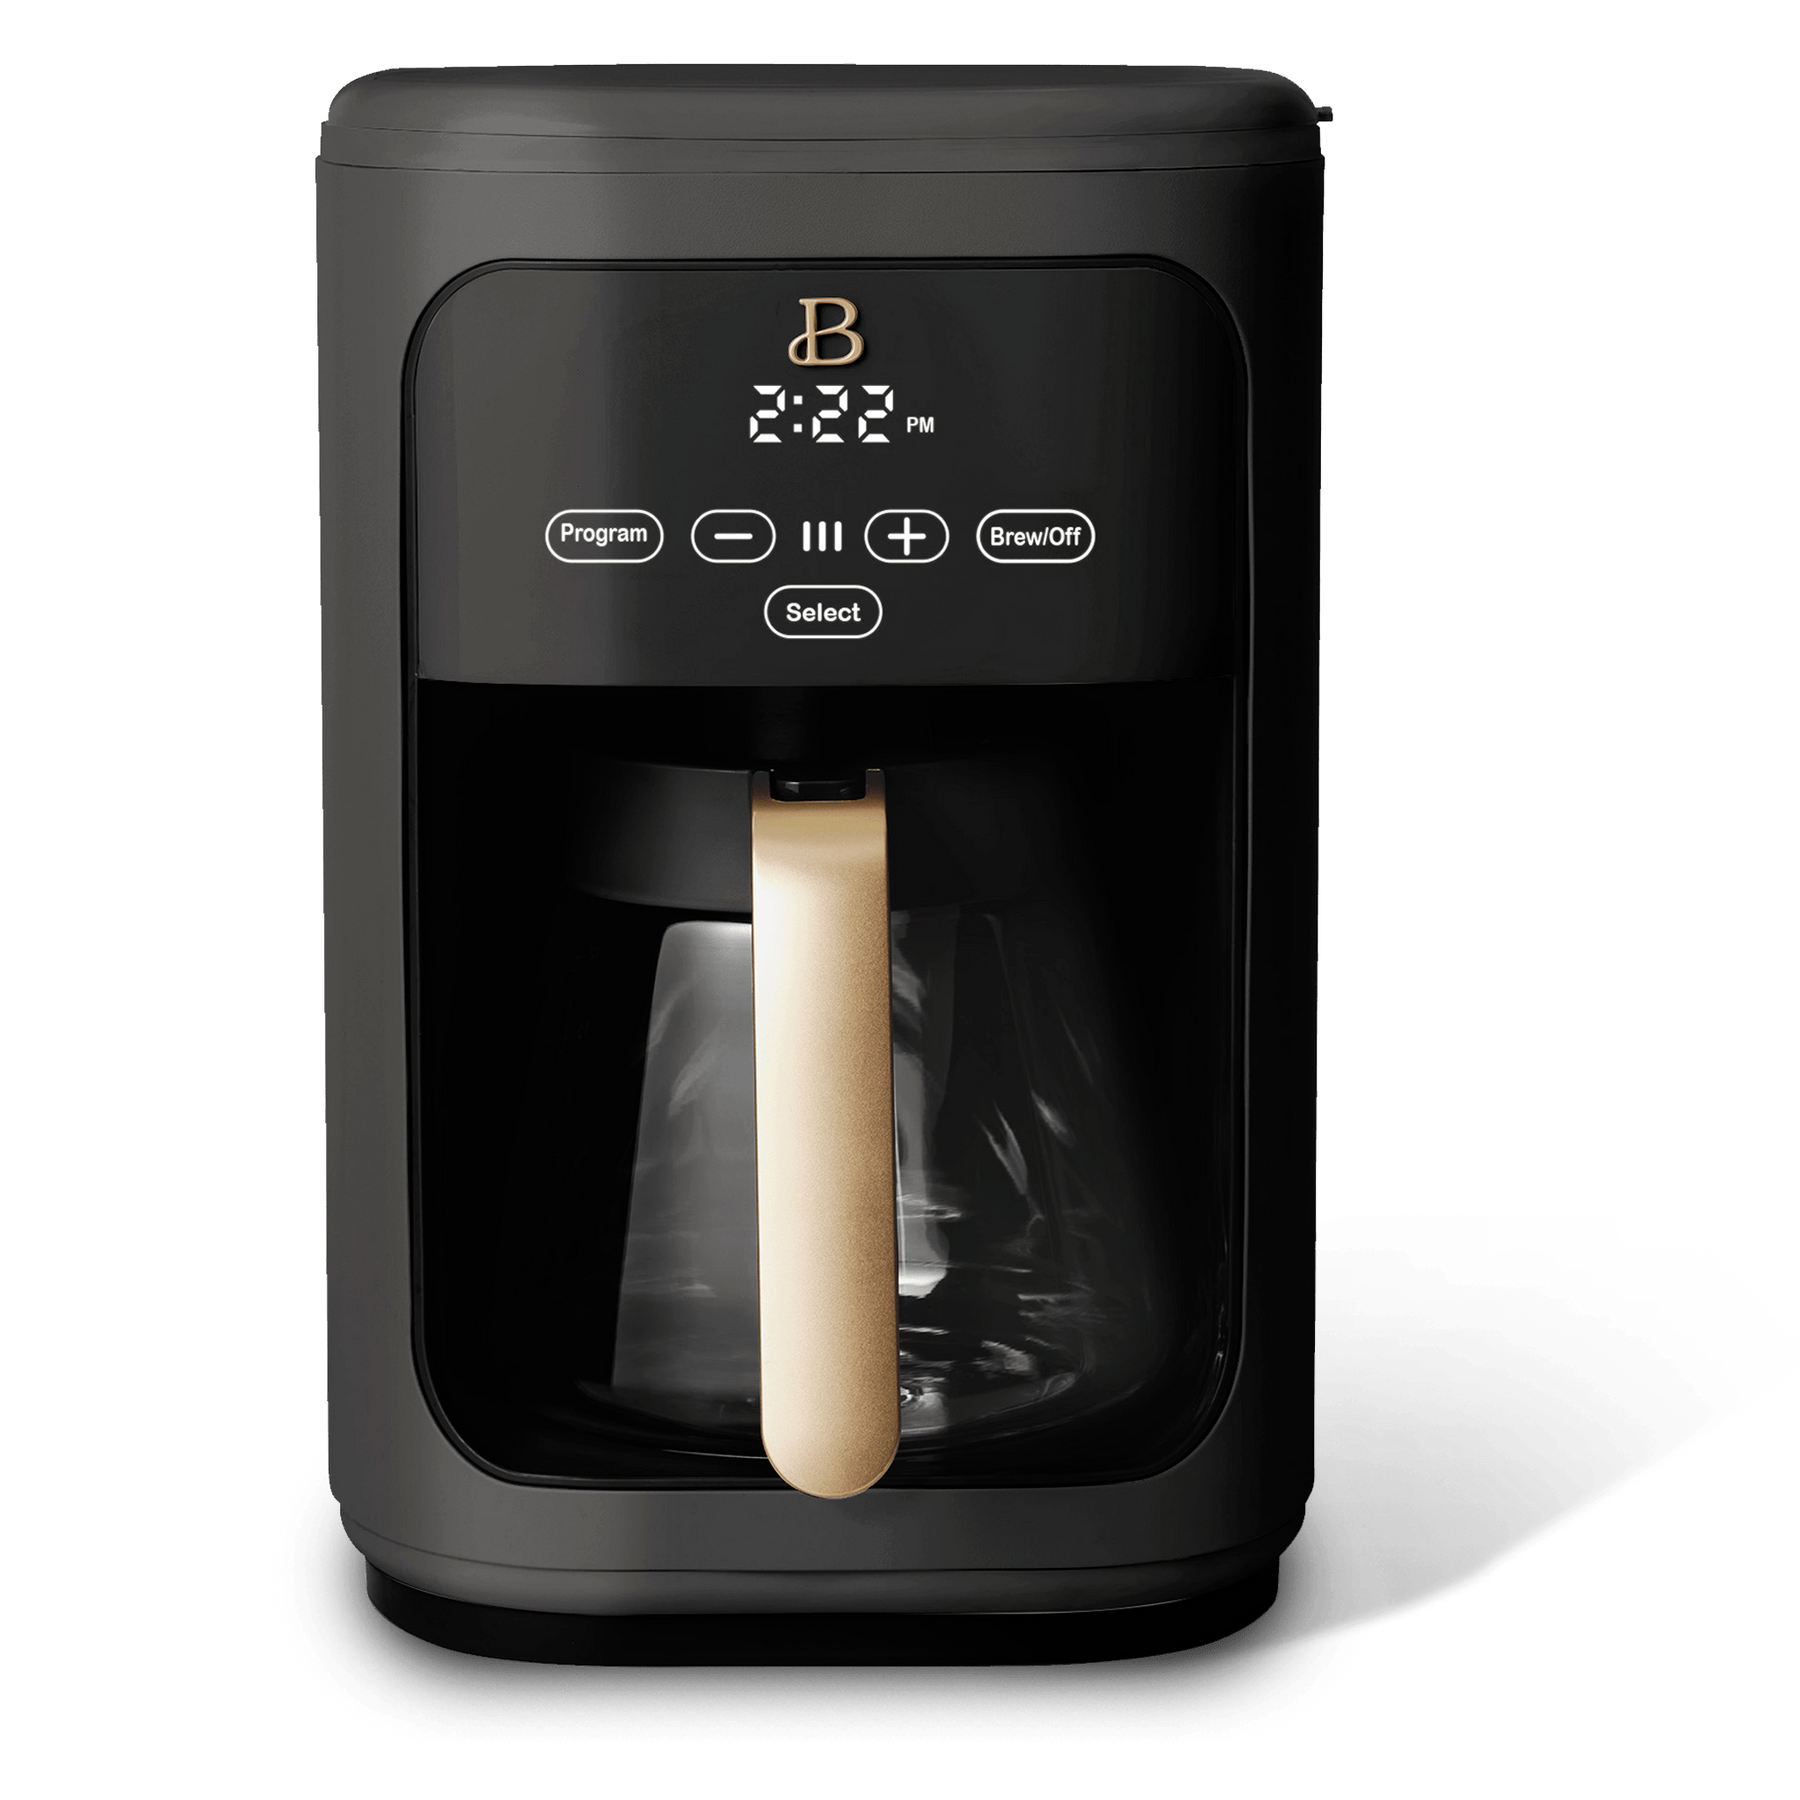 Mother's Day Gift of the Day: Beautiful Touchscreen Coffee Maker